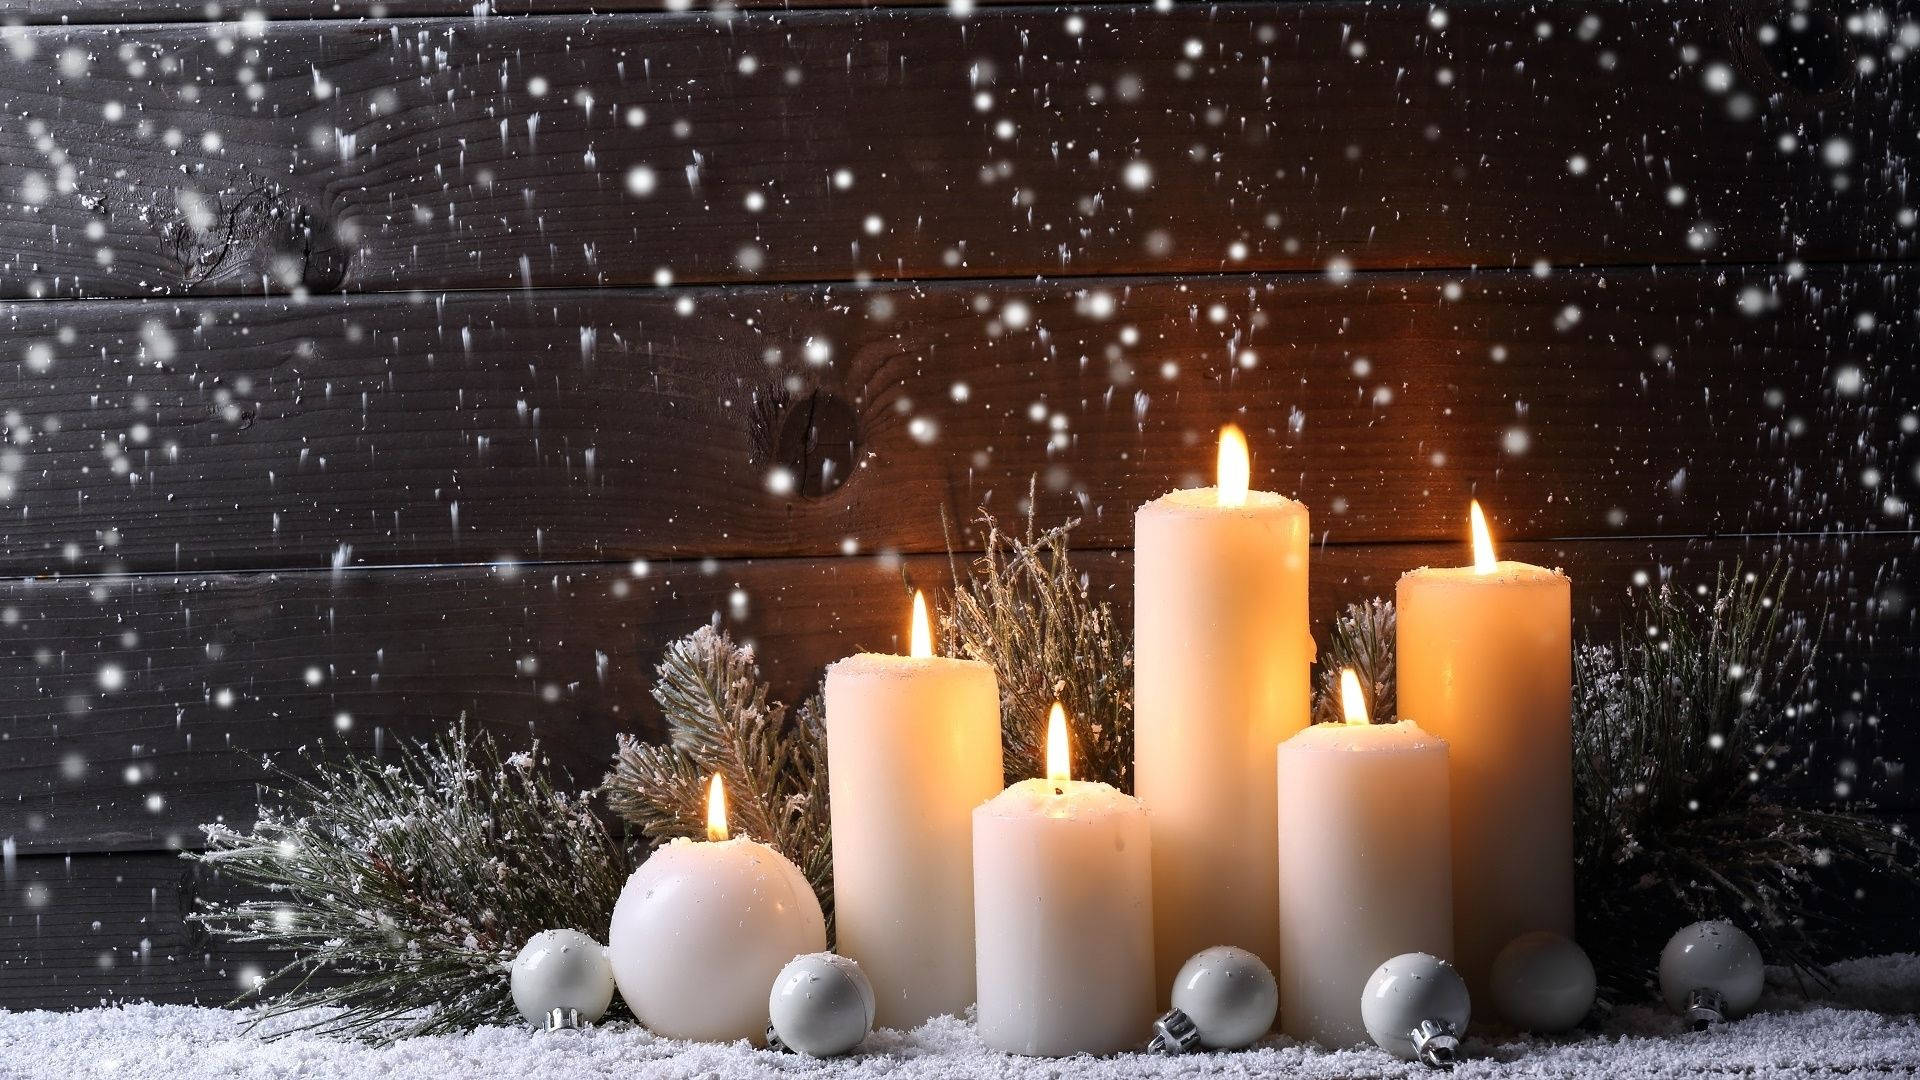 Candles In A Snowy Place Background